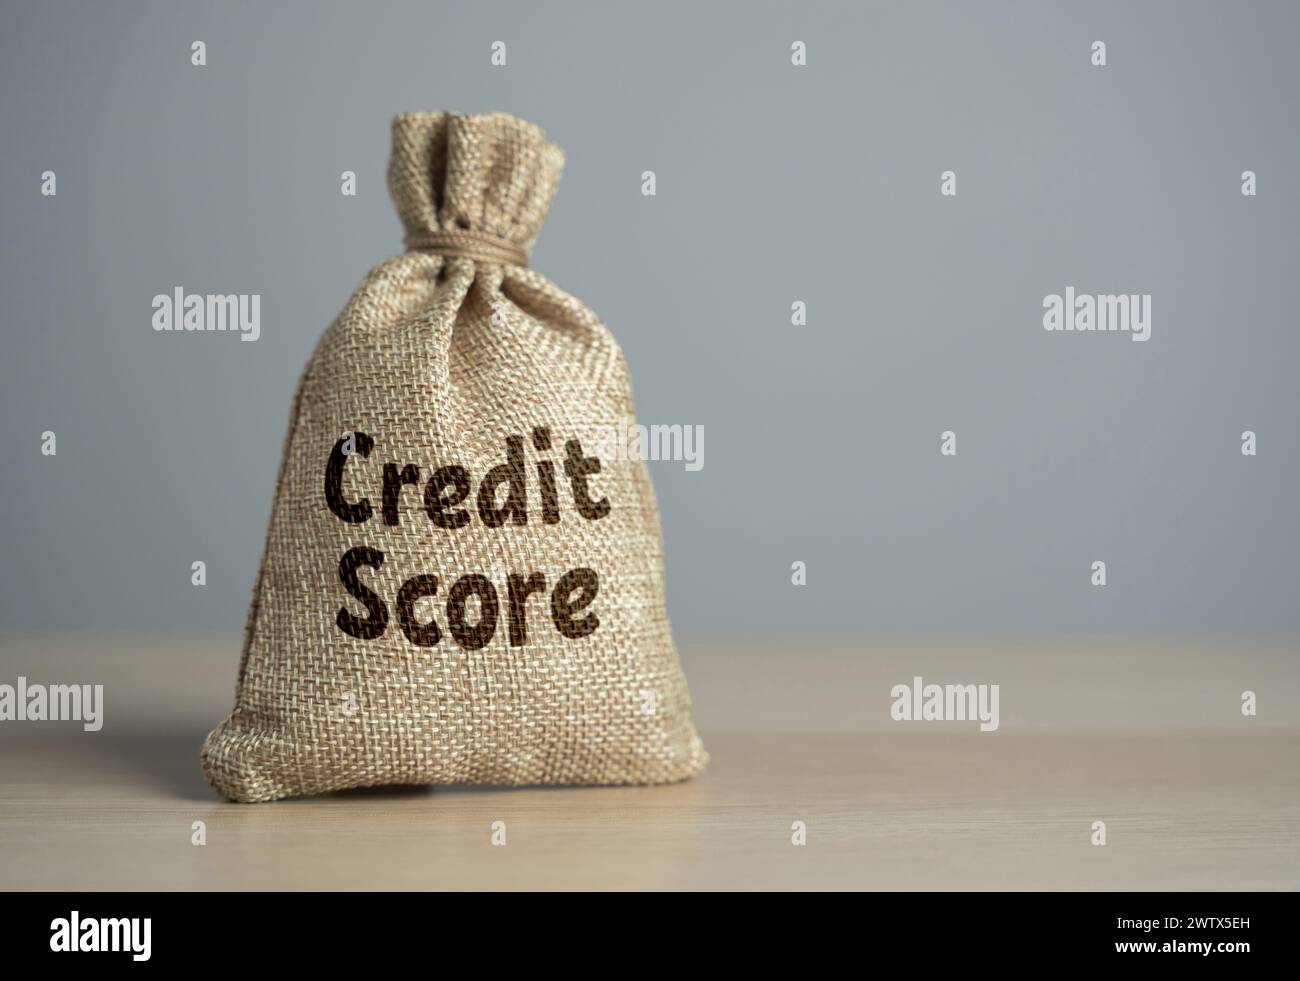 Bag with credit score. High costs, expensive loan servicing, low credit rating. Seeking advice, budgeting consciously, and exploring debt management o Stock Photo